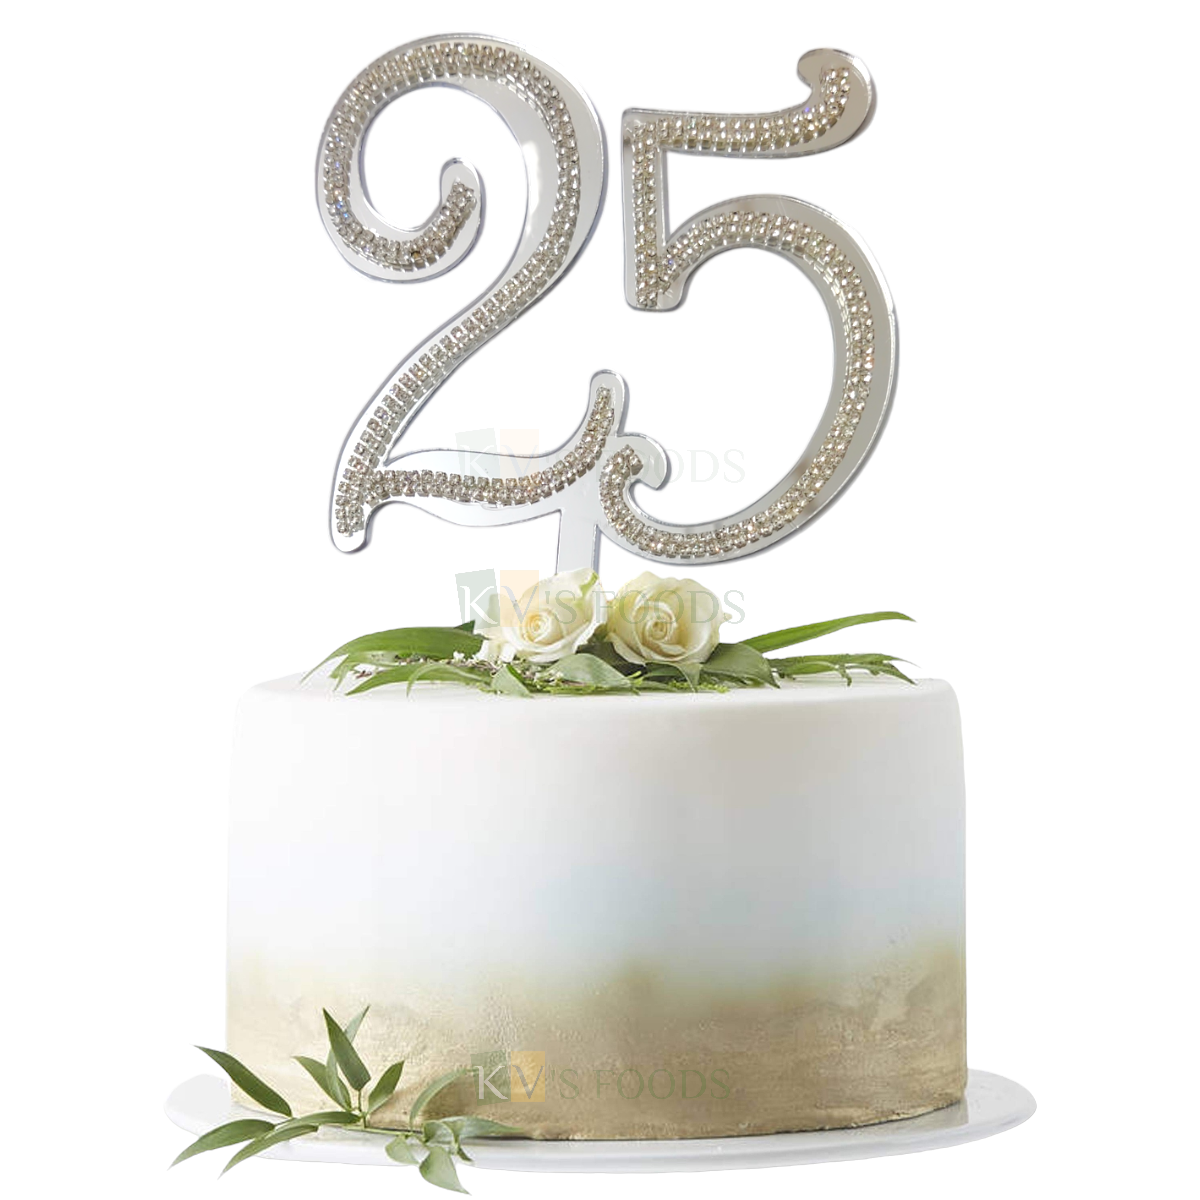 1PC Silver Shiny Acrylic 25 Number With Stones or Diamond Lace On It Cake Topper, Happy 25th Birthday Theme, 25 Years Old Birthday Party Twenty Five Number Theme Cake Topper Anniversary Celebration